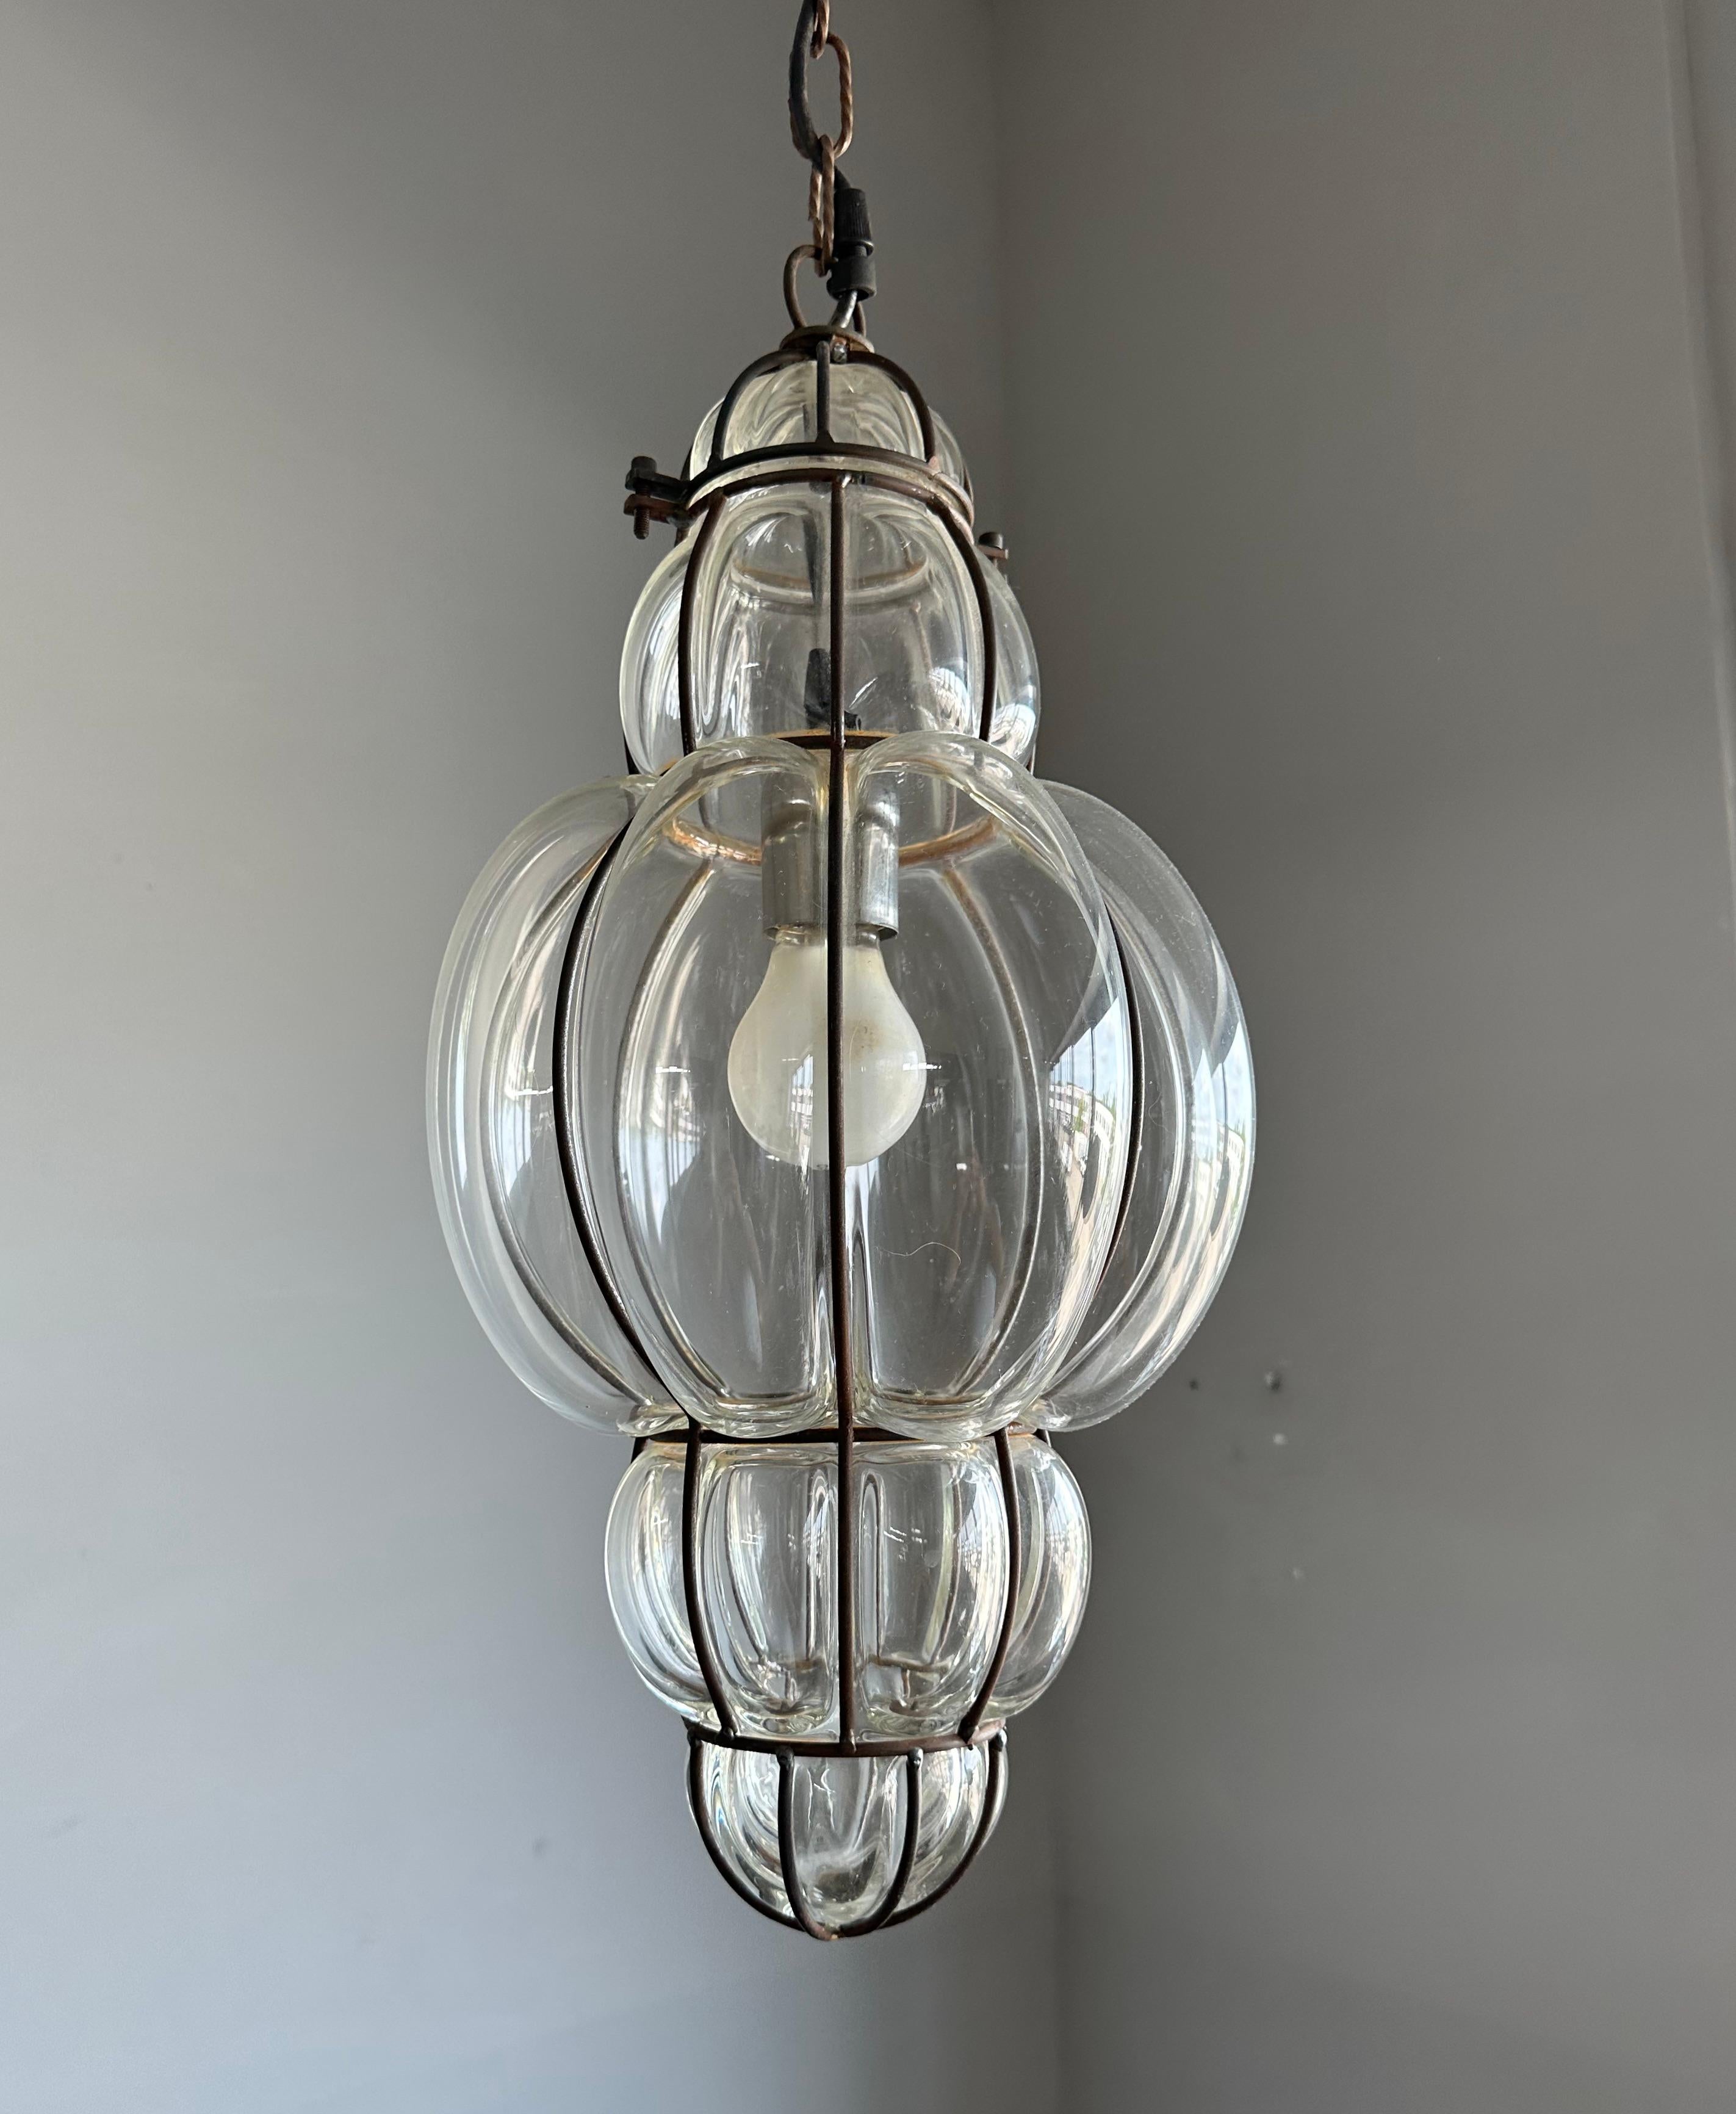 ceiling light with chain and hook